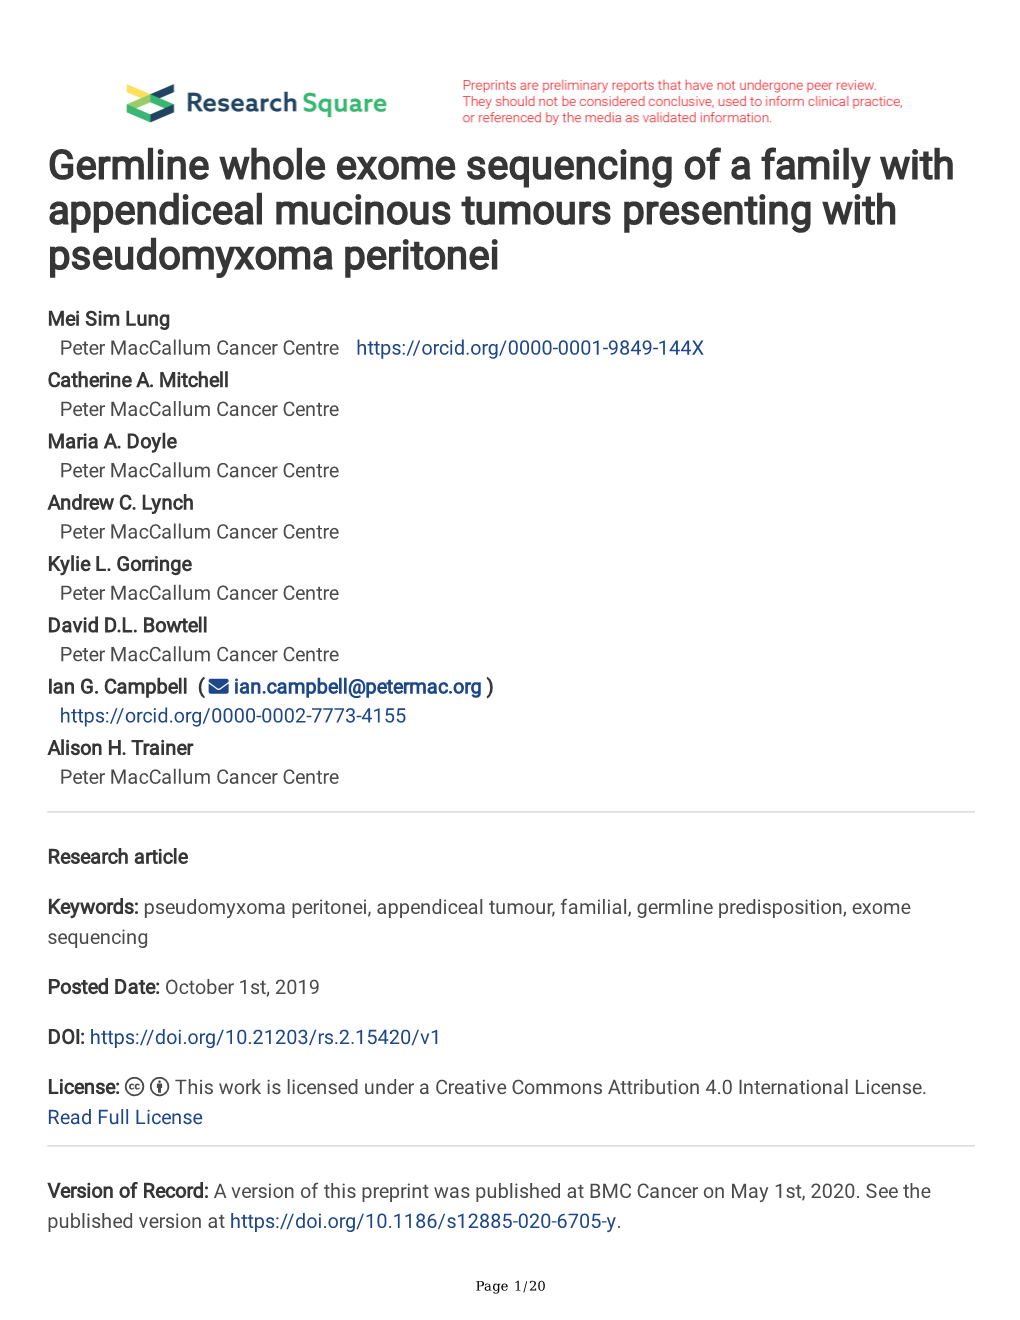 Germline Whole Exome Sequencing of a Family with Appendiceal Mucinous Tumours Presenting with Pseudomyxoma Peritonei